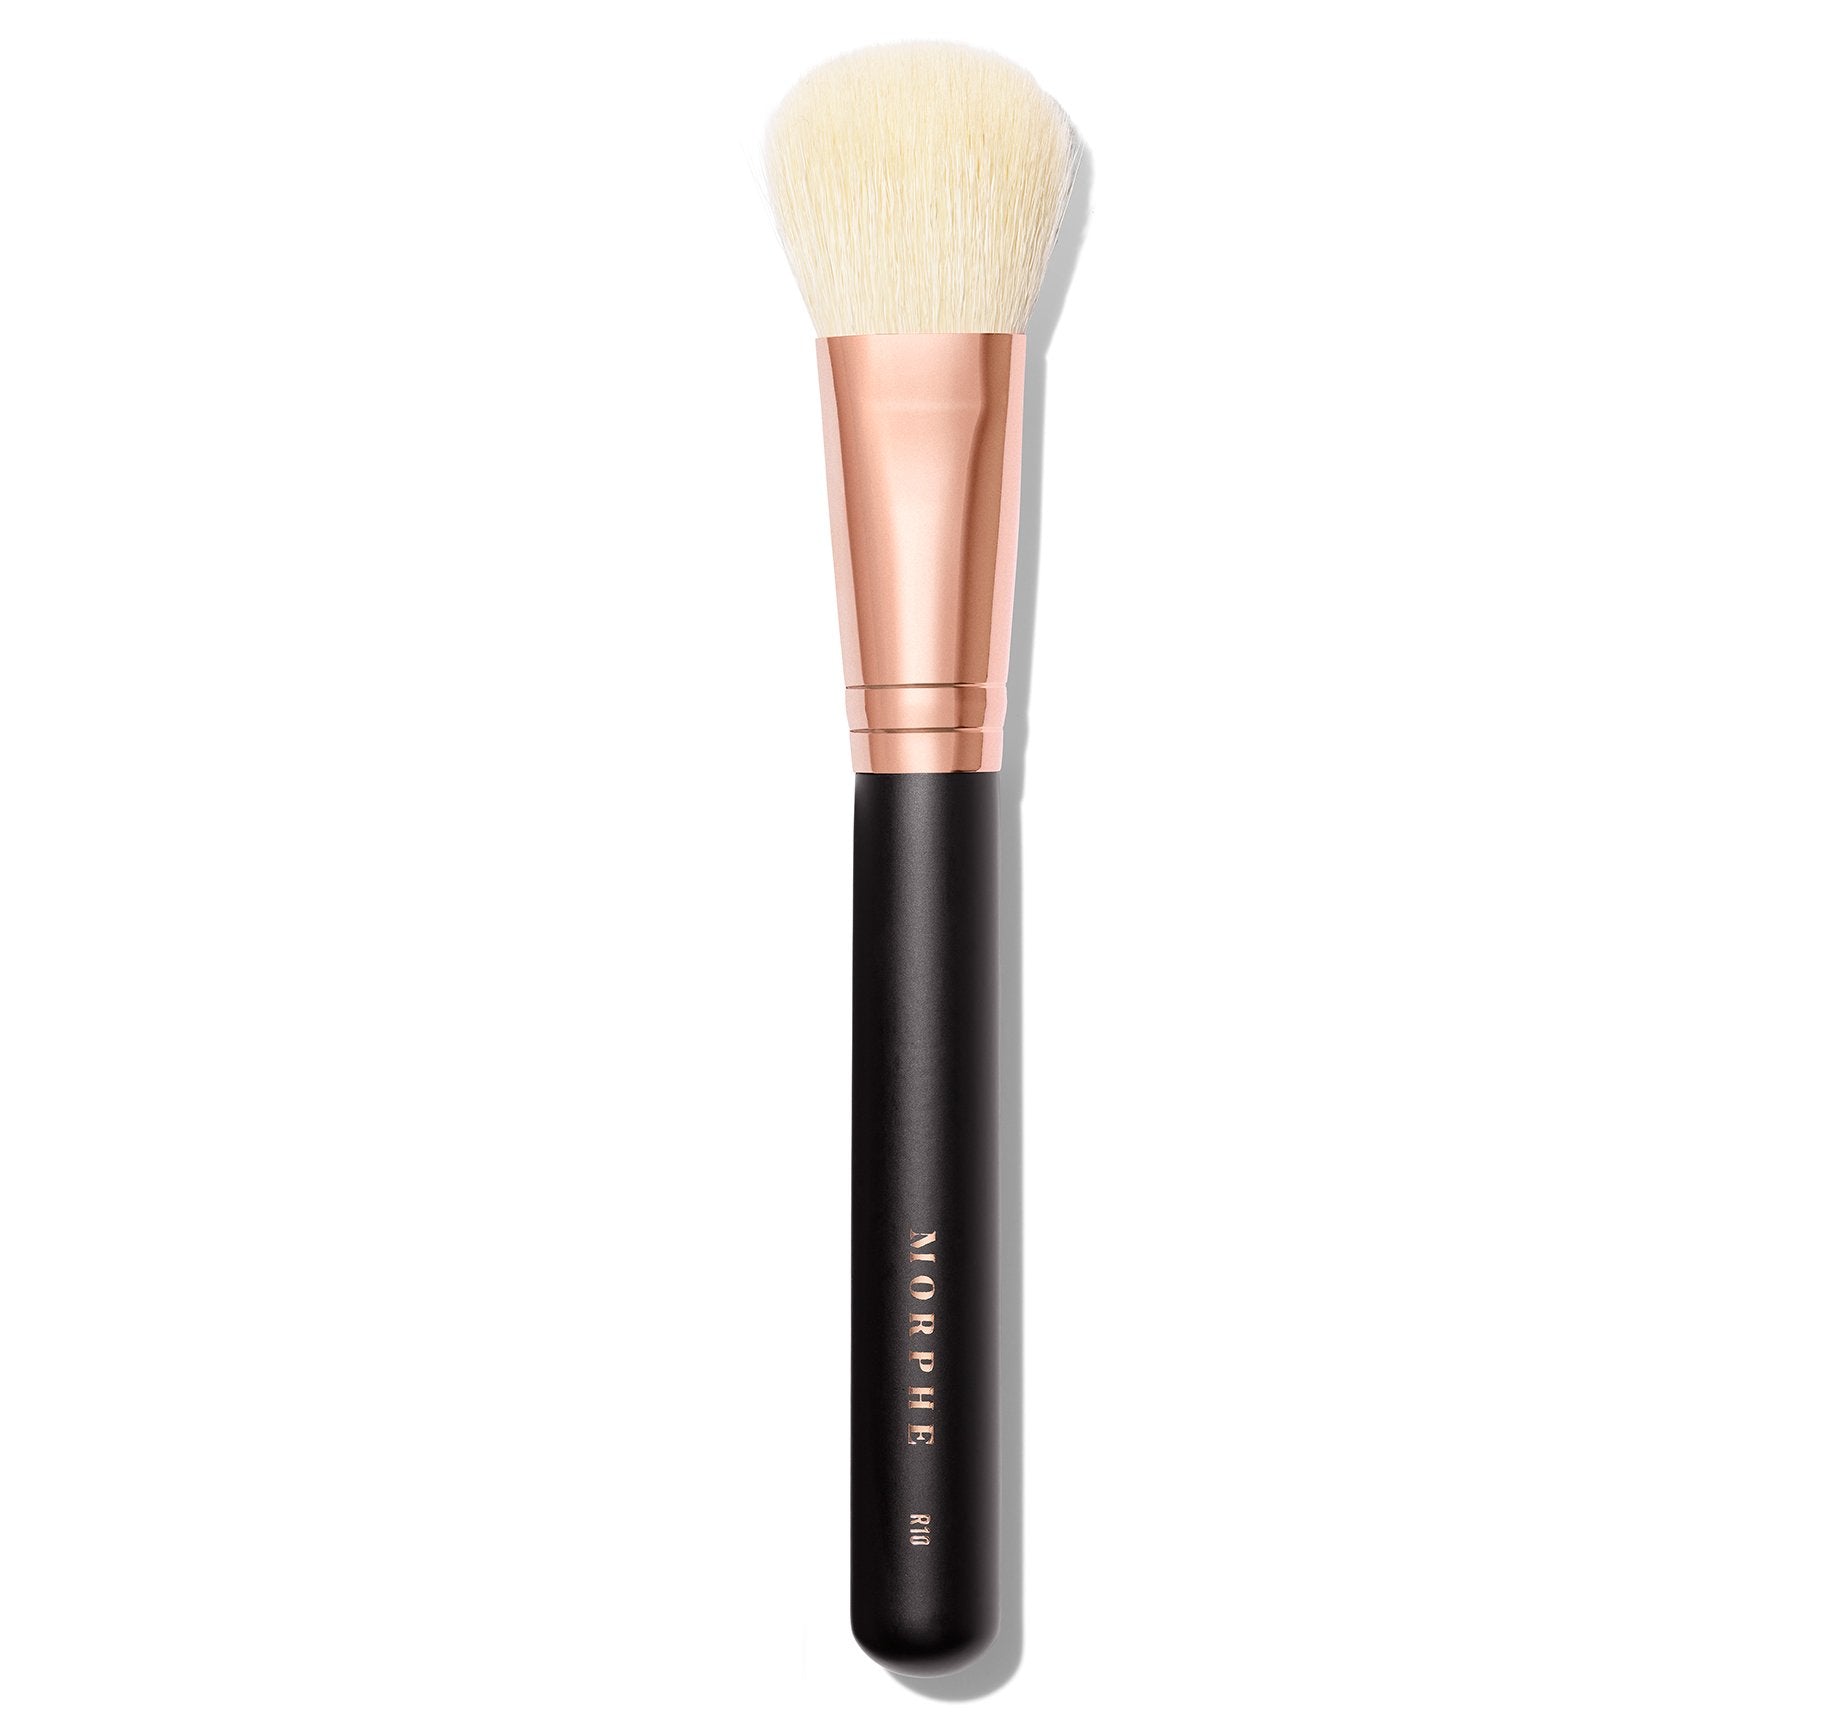 R10 Deluxe Tapered Powder Brush